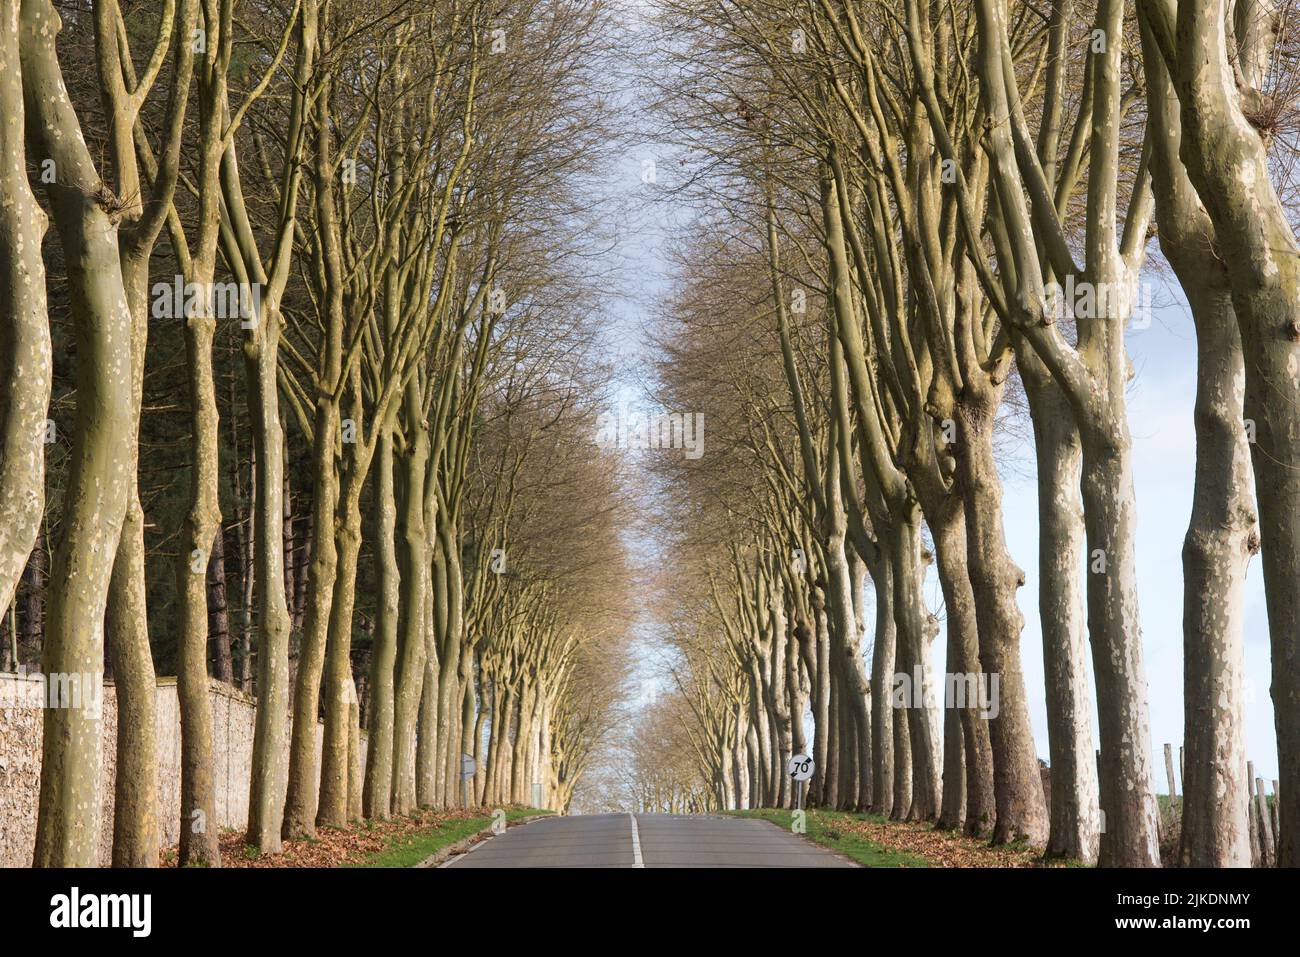 Departmental road lined with plane trees, Yvelines department, Ile-de-France region, France, Europe. Stock Photo